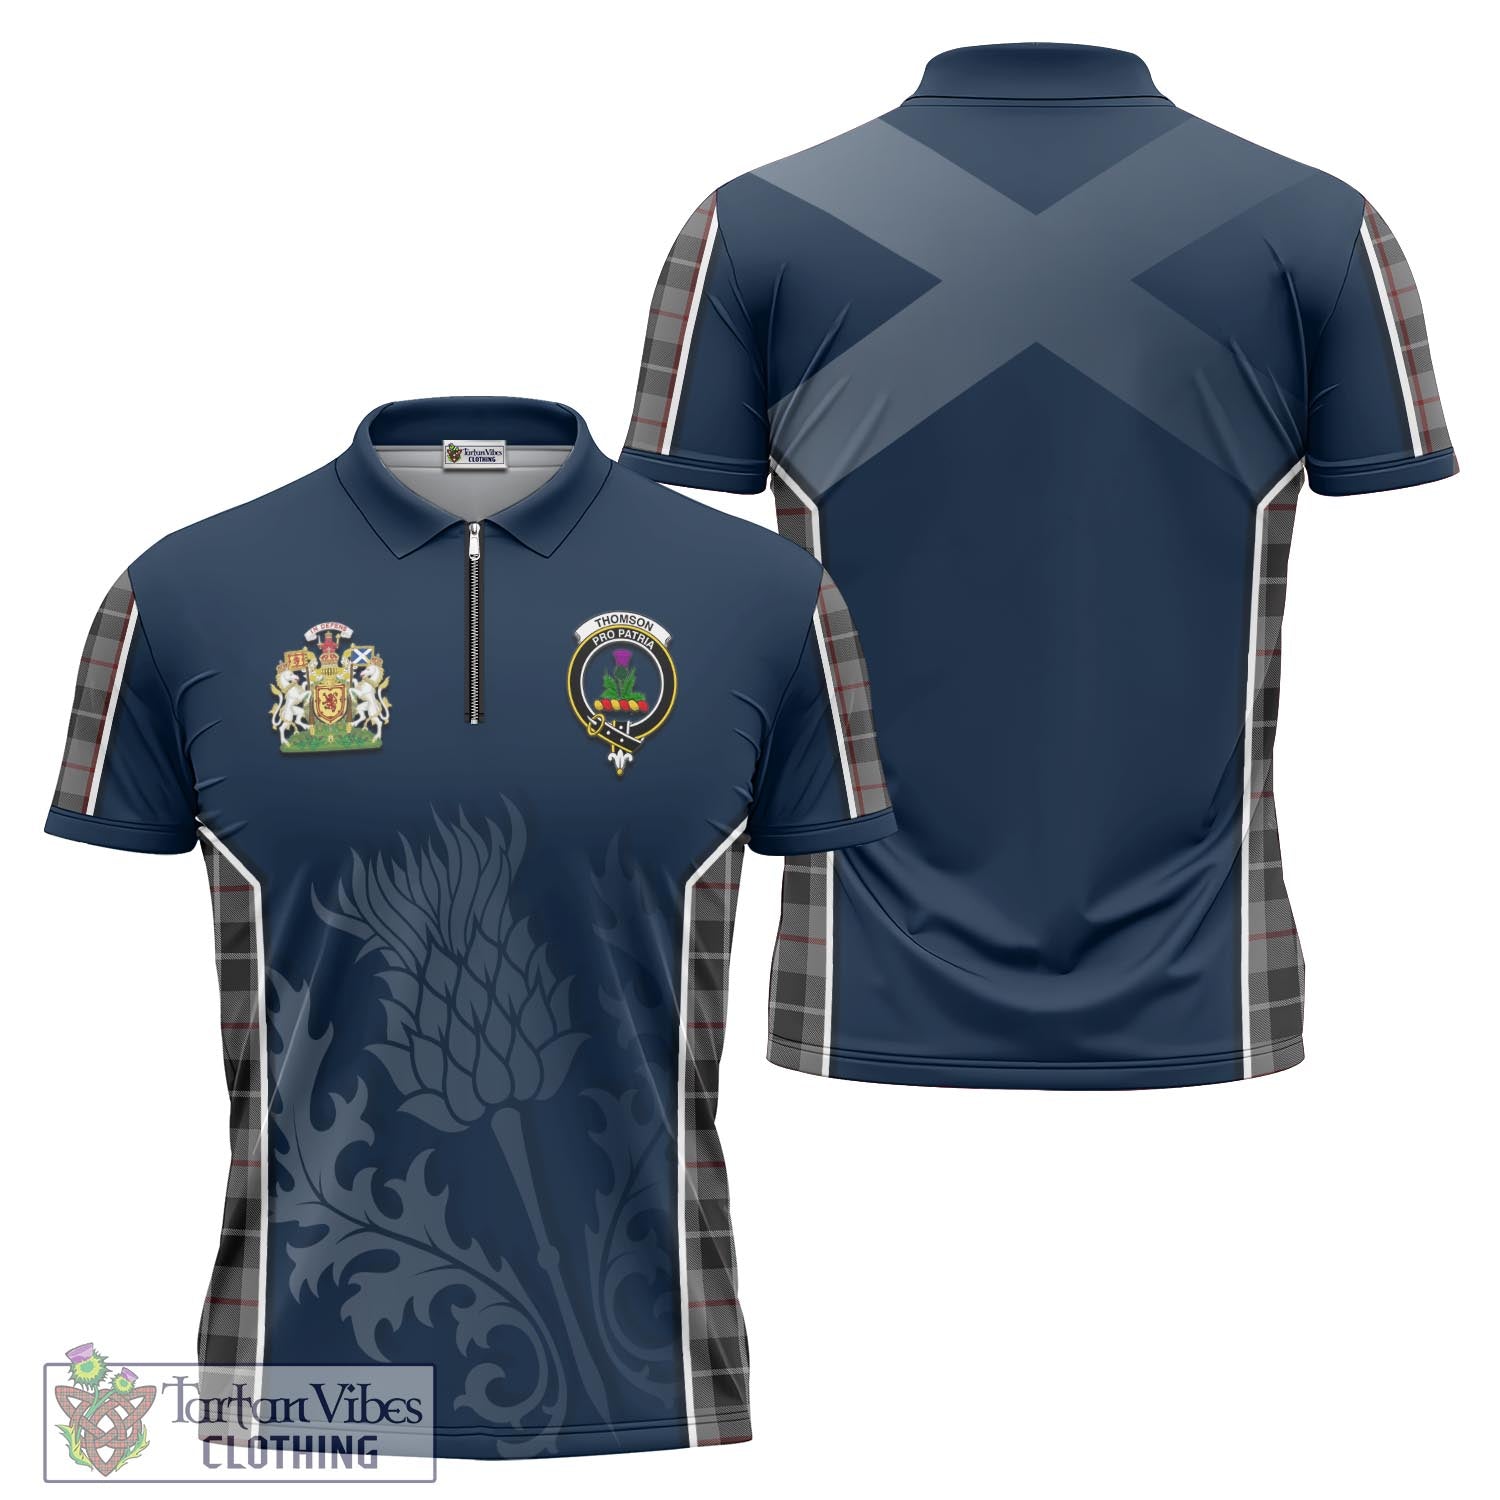 Tartan Vibes Clothing Thompson Grey Tartan Zipper Polo Shirt with Family Crest and Scottish Thistle Vibes Sport Style